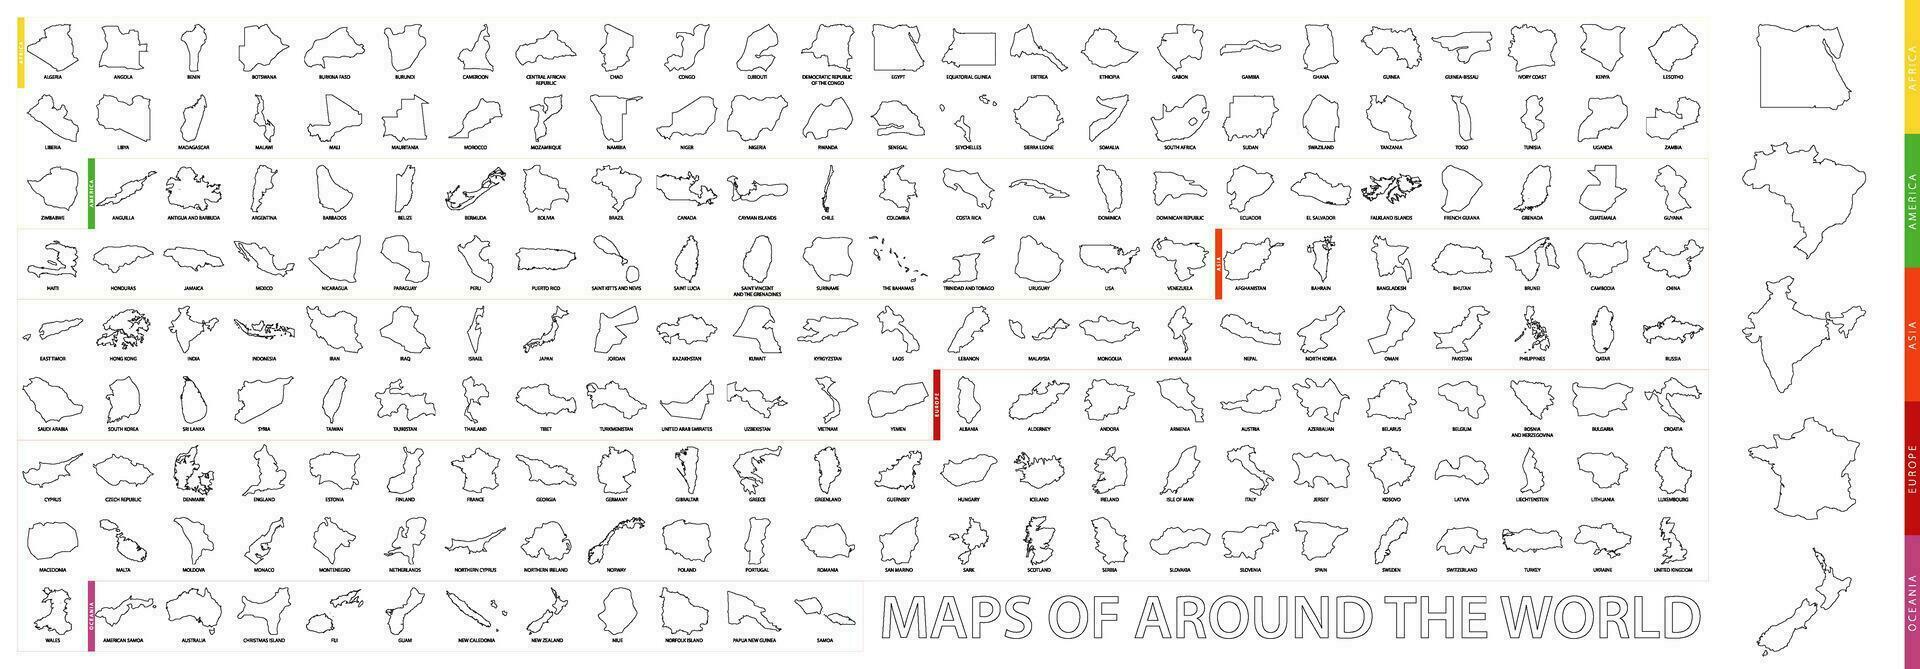 Maps of Around the World, Outline maps collection. vector